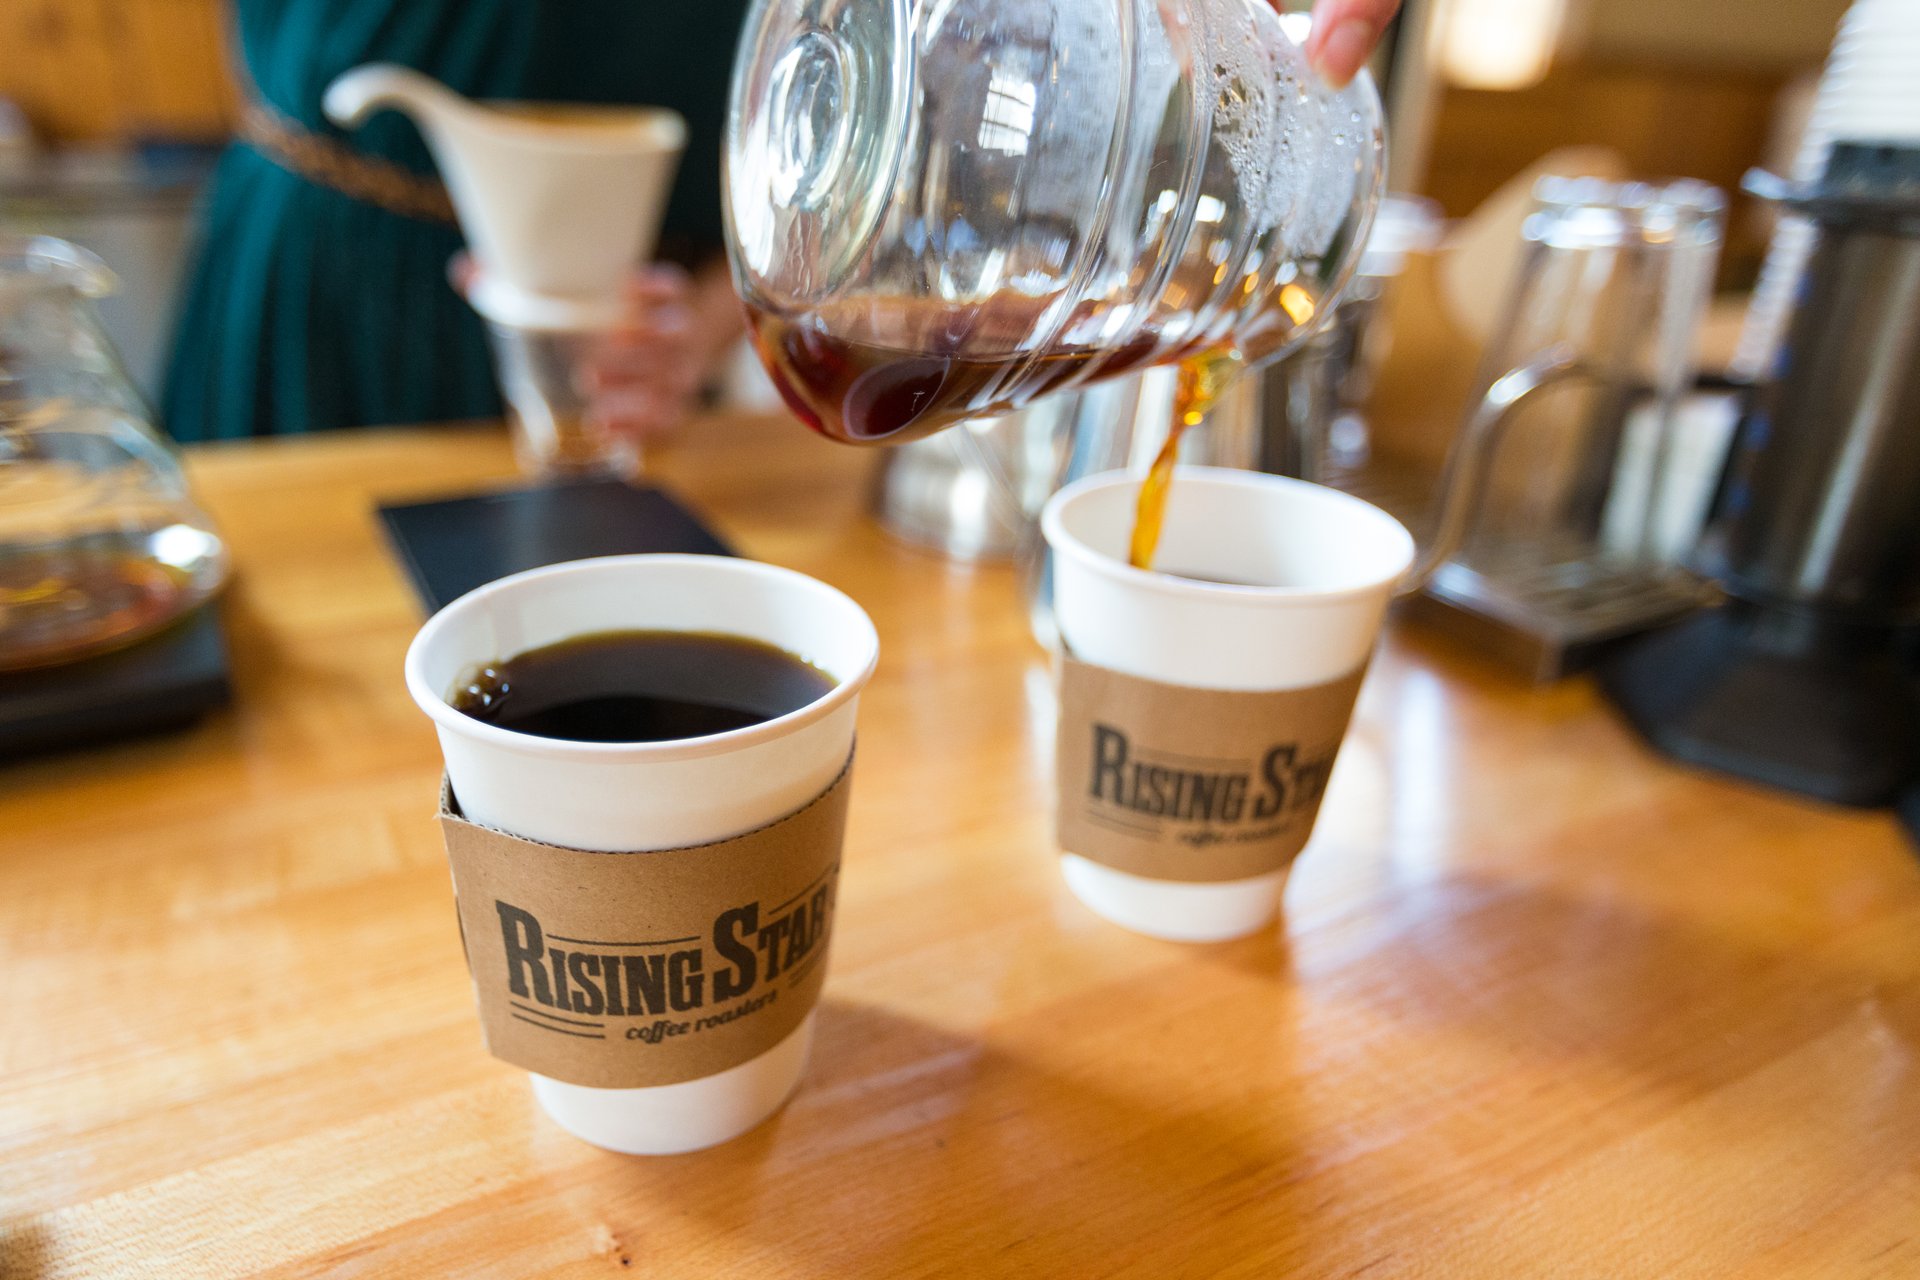 USA Today/10 Best Names Rising Star Coffee Roasters One of the "Best